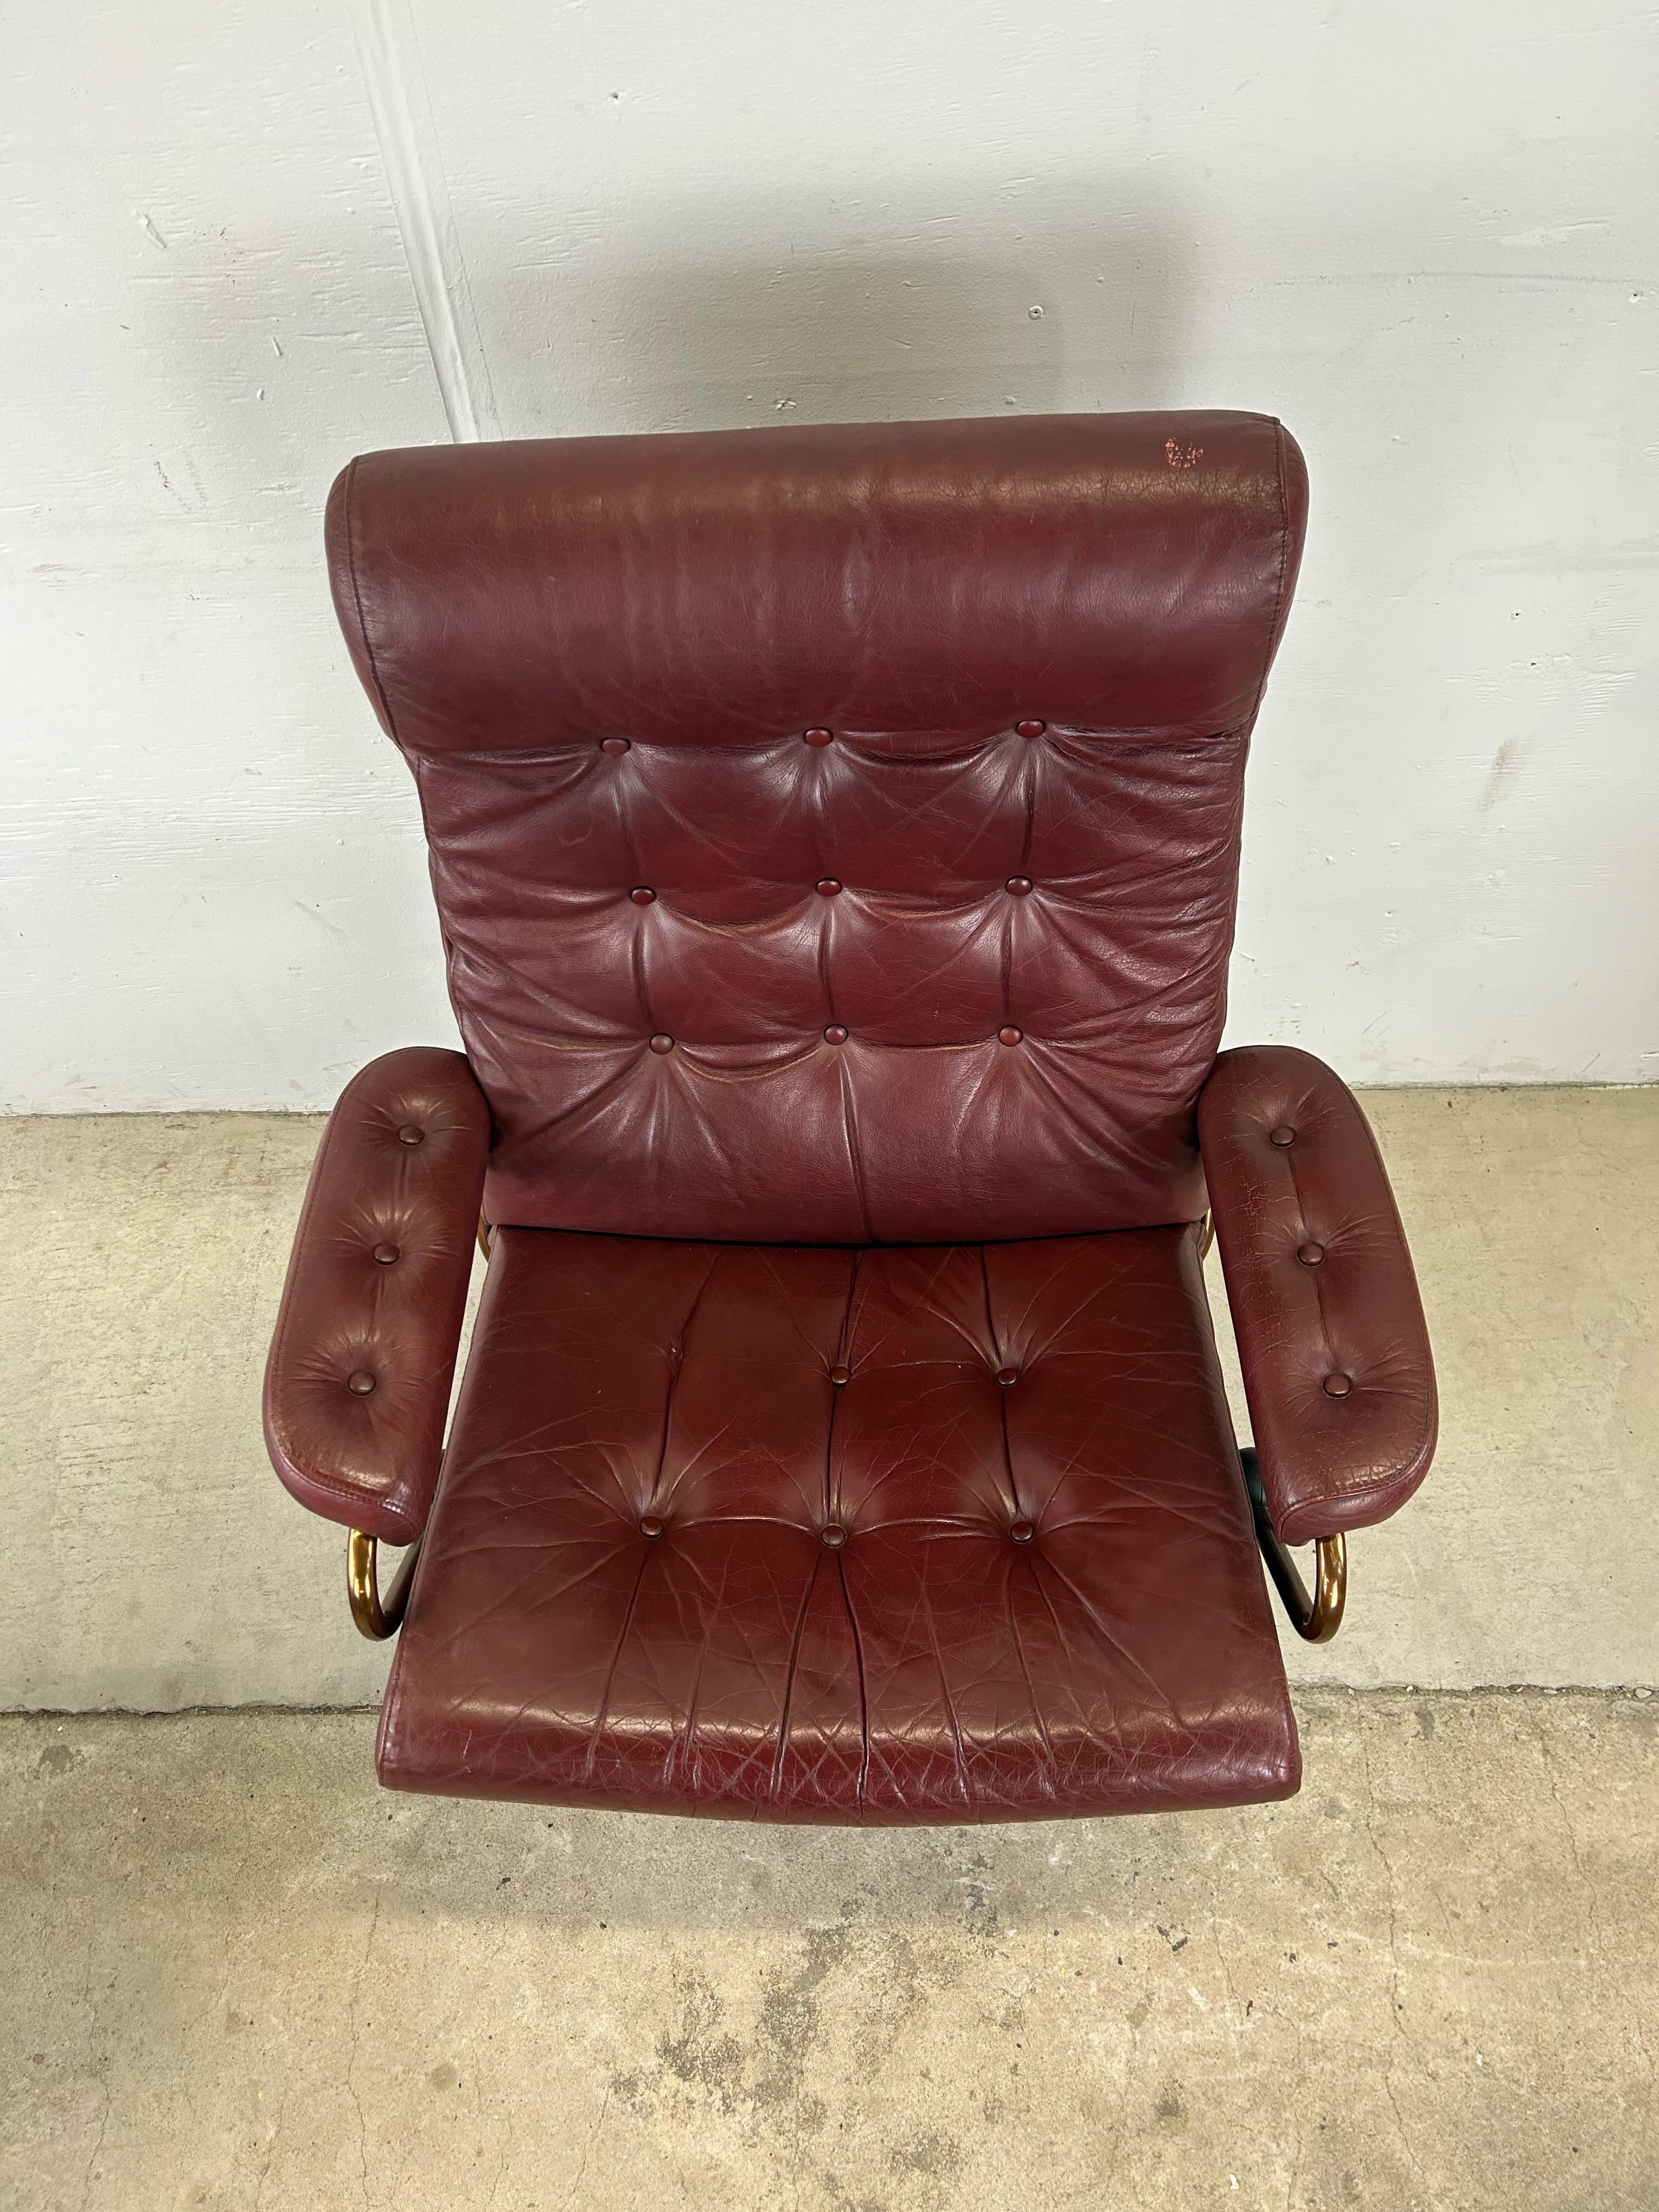 20th Century Scandinavian Modern Red Leather Ekornes Stressless Recliner with Ottoman For Sale